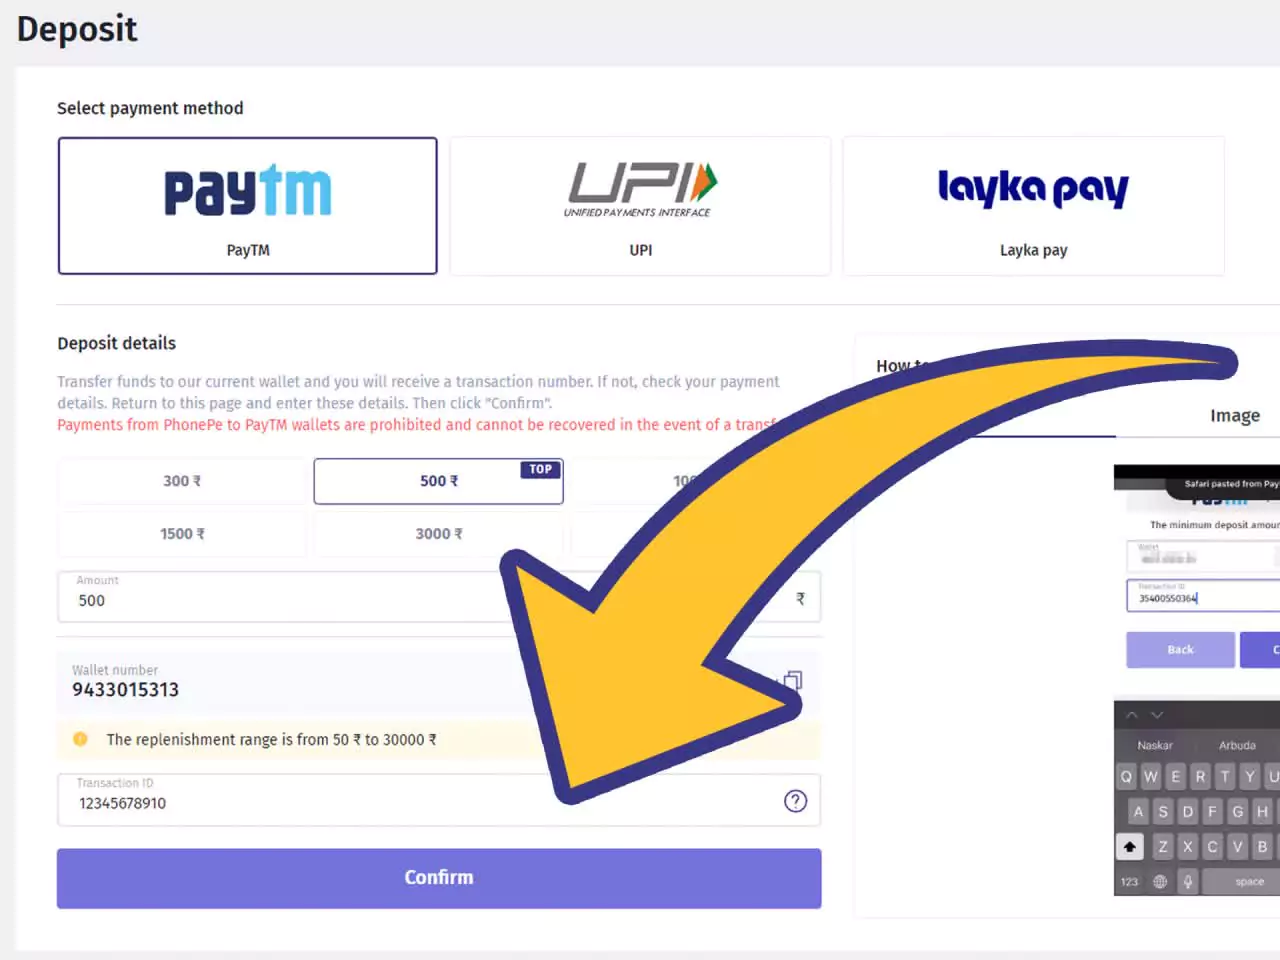 Top up your account.